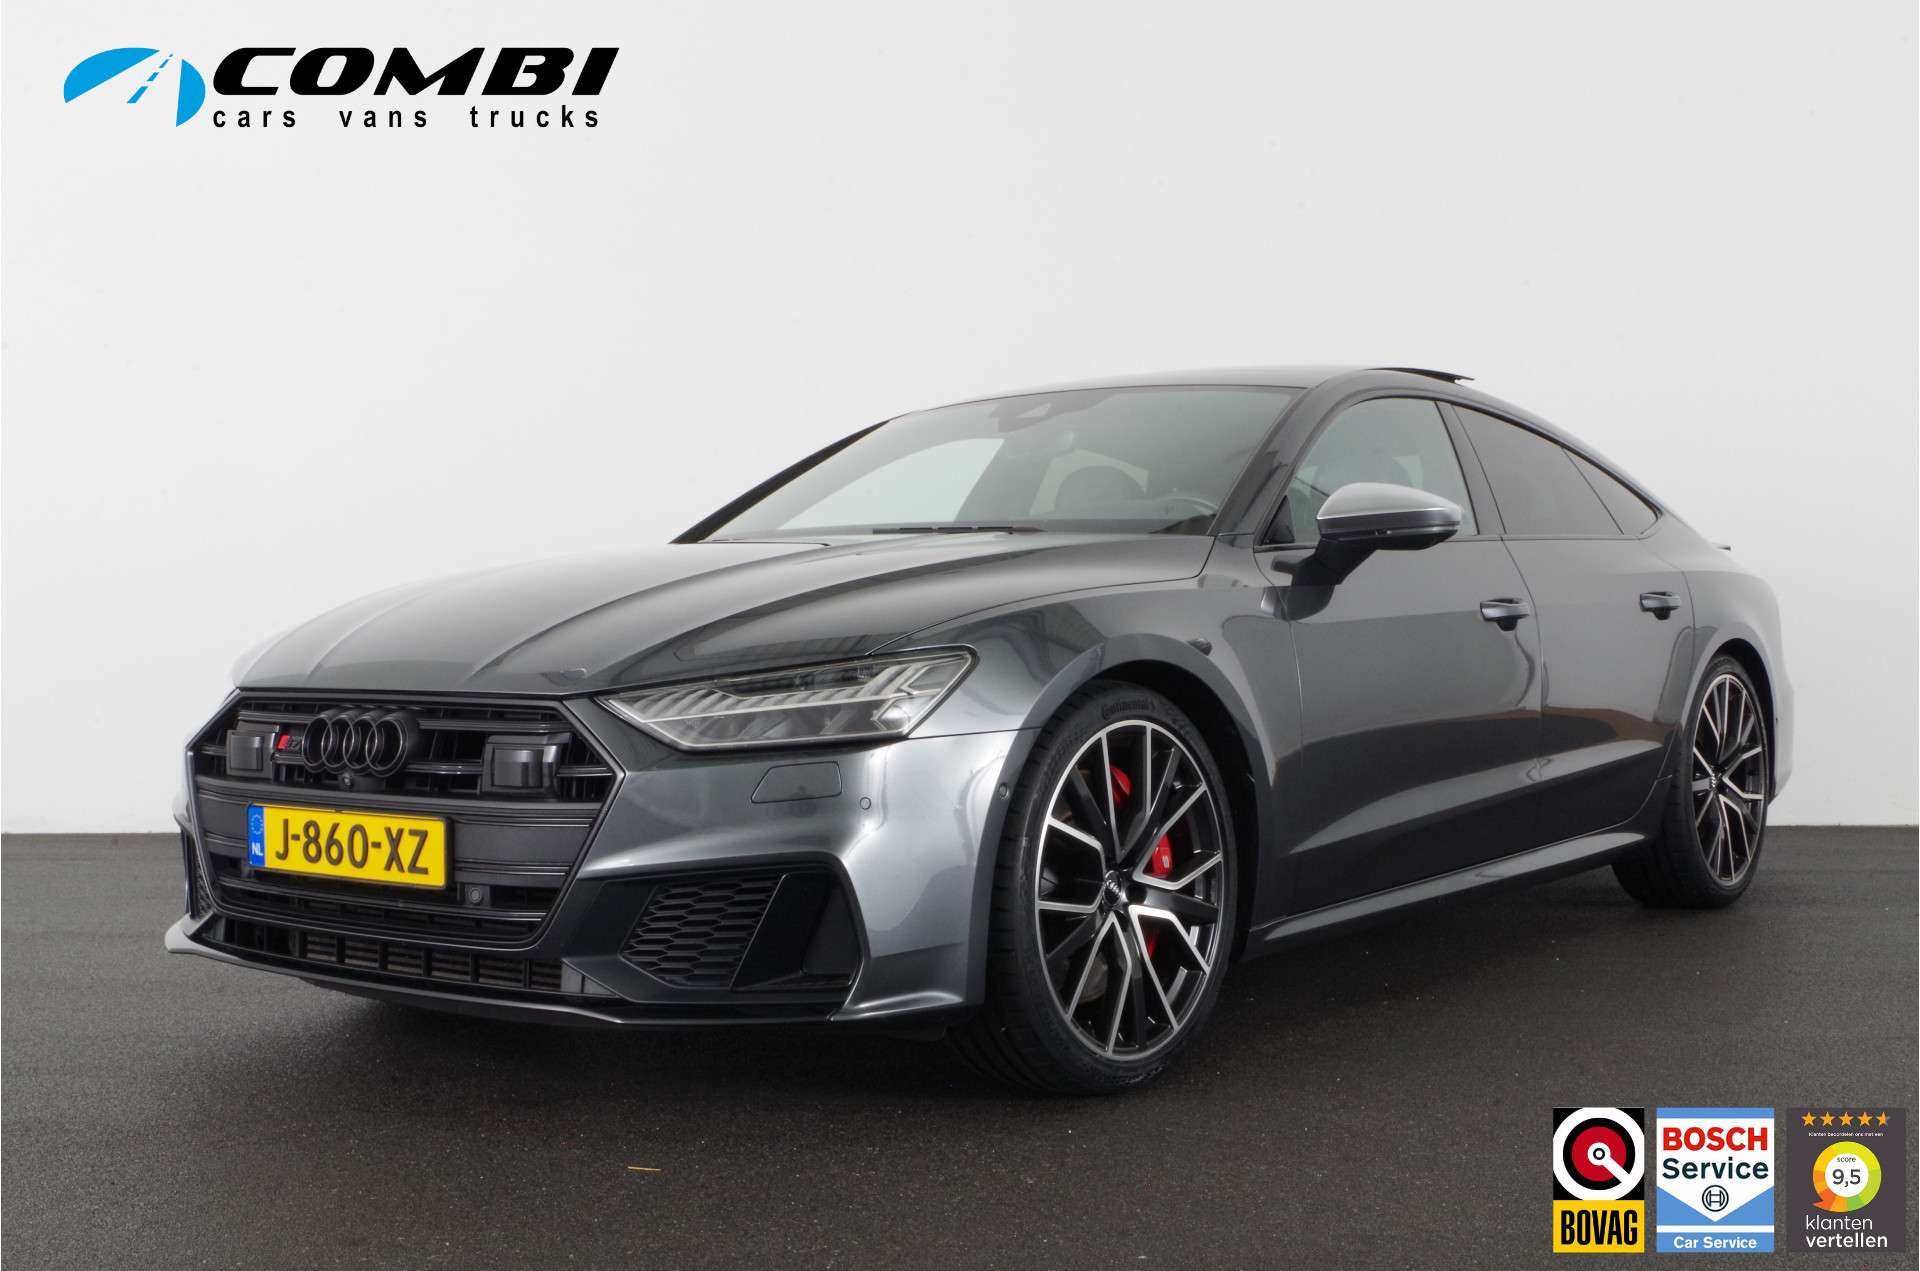 Audi S7 Compact in Grey used in HARDENBERG for € 66,850.-